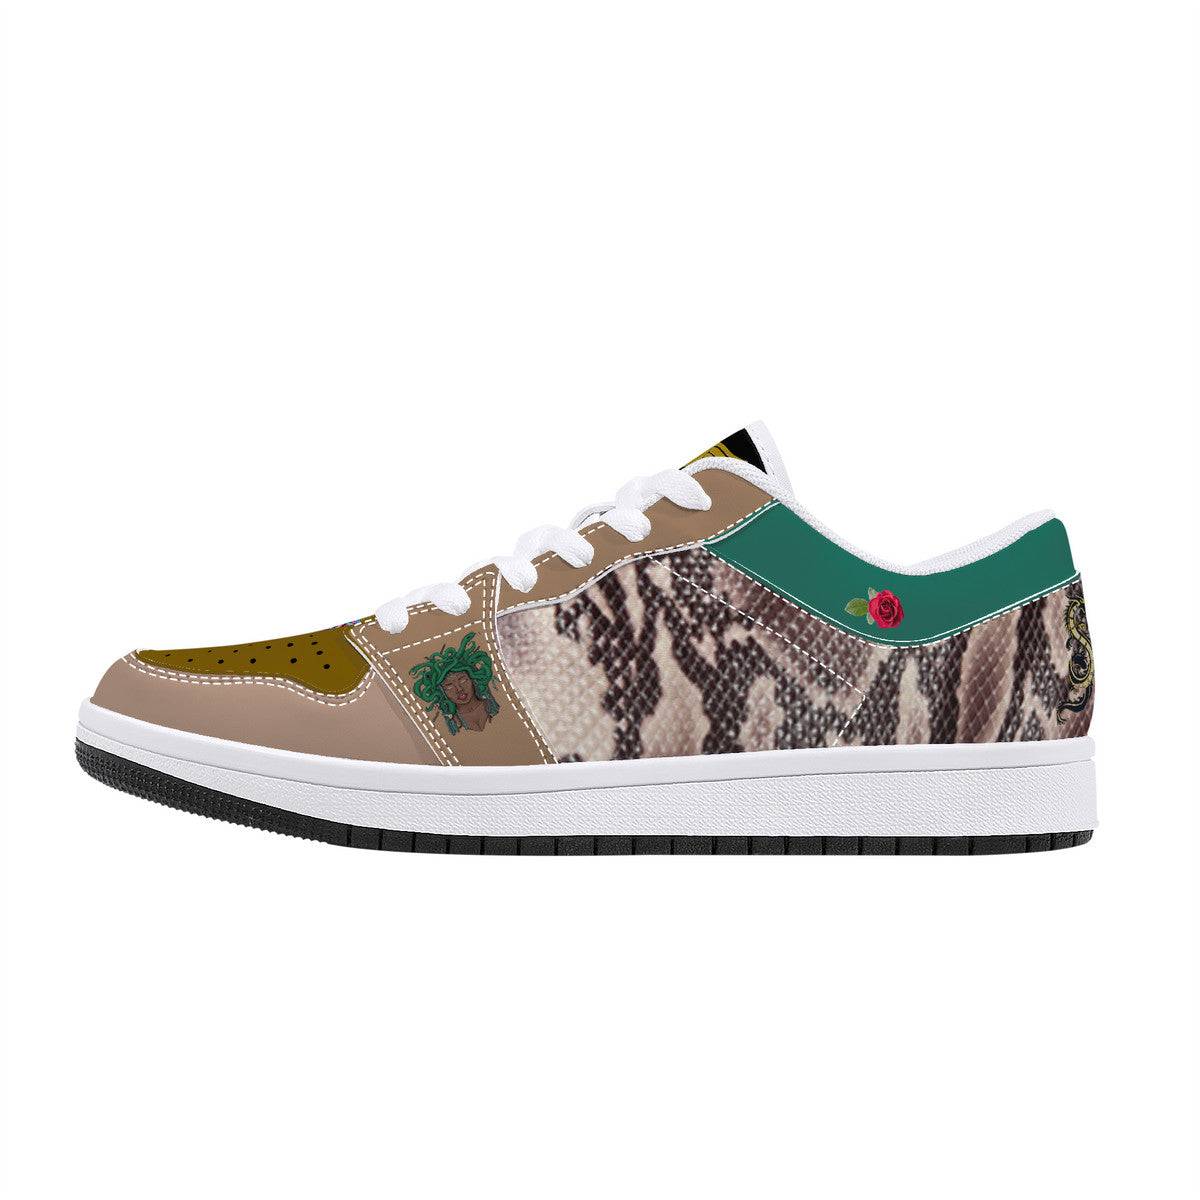 Majestic Snake Scales and Green Print | Vision 1 Collection | Low Top Sneaker - Designed Shoe Drop - Shoe Zero